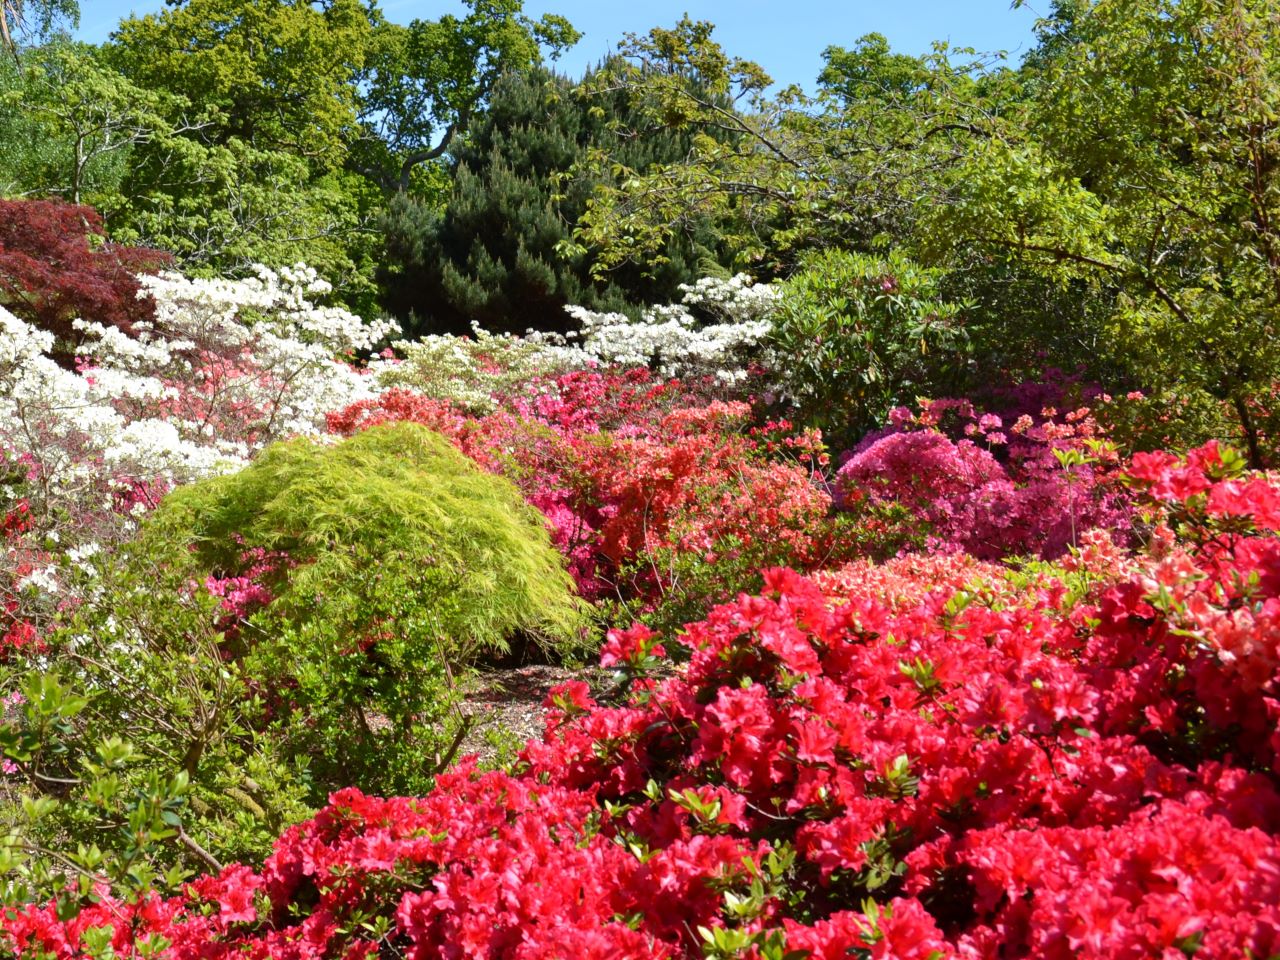 View of Rhododendron